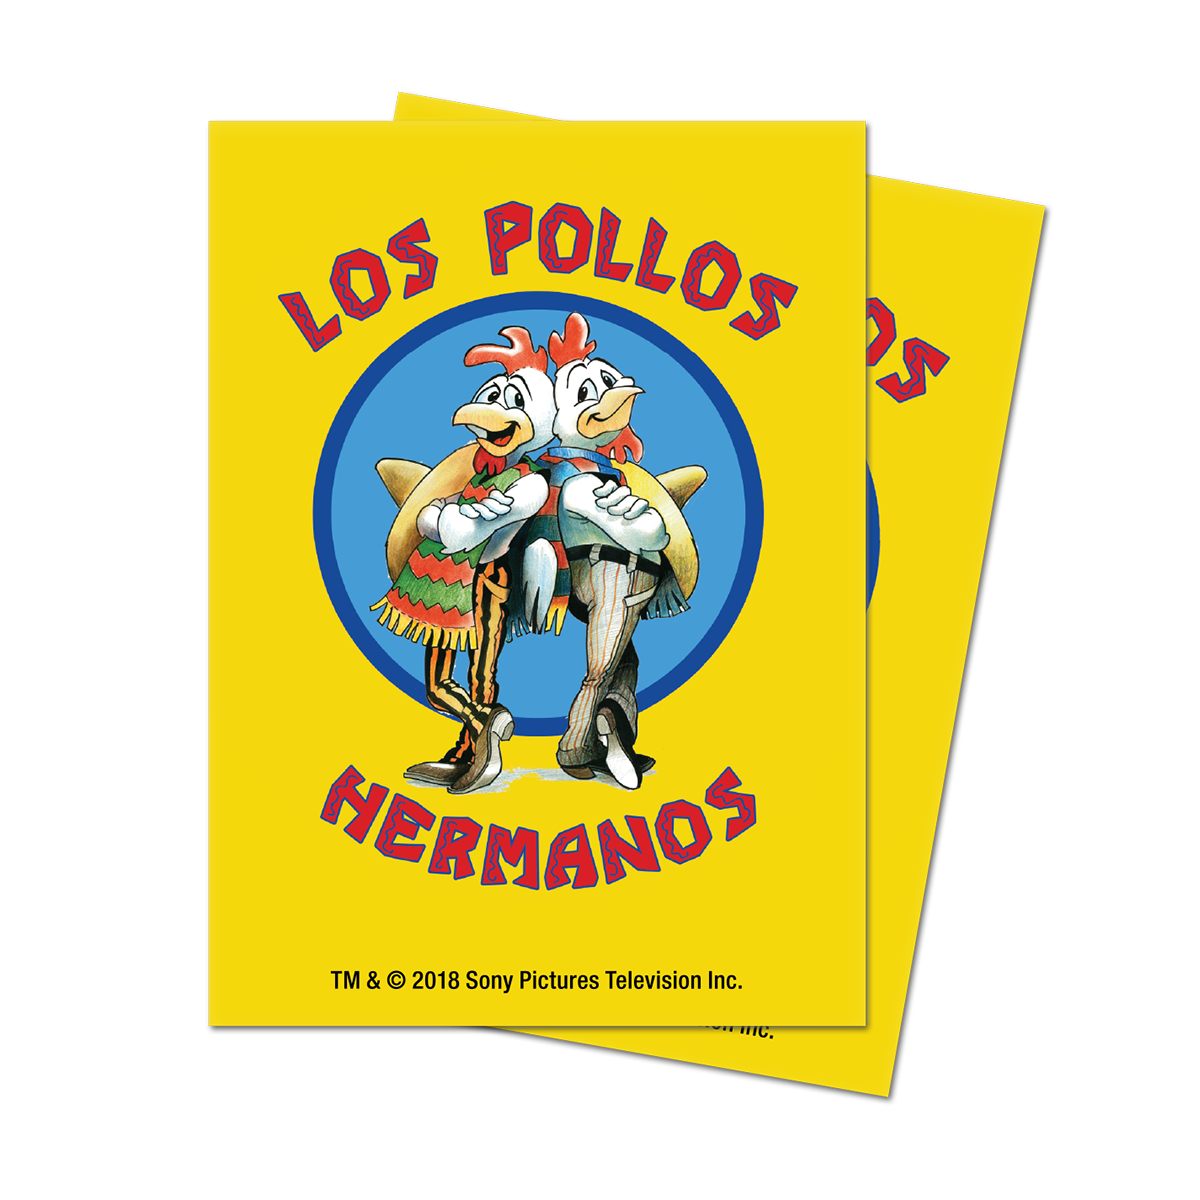 Are we still posting jobs I am the owner of los pollos hermanos  9GAG